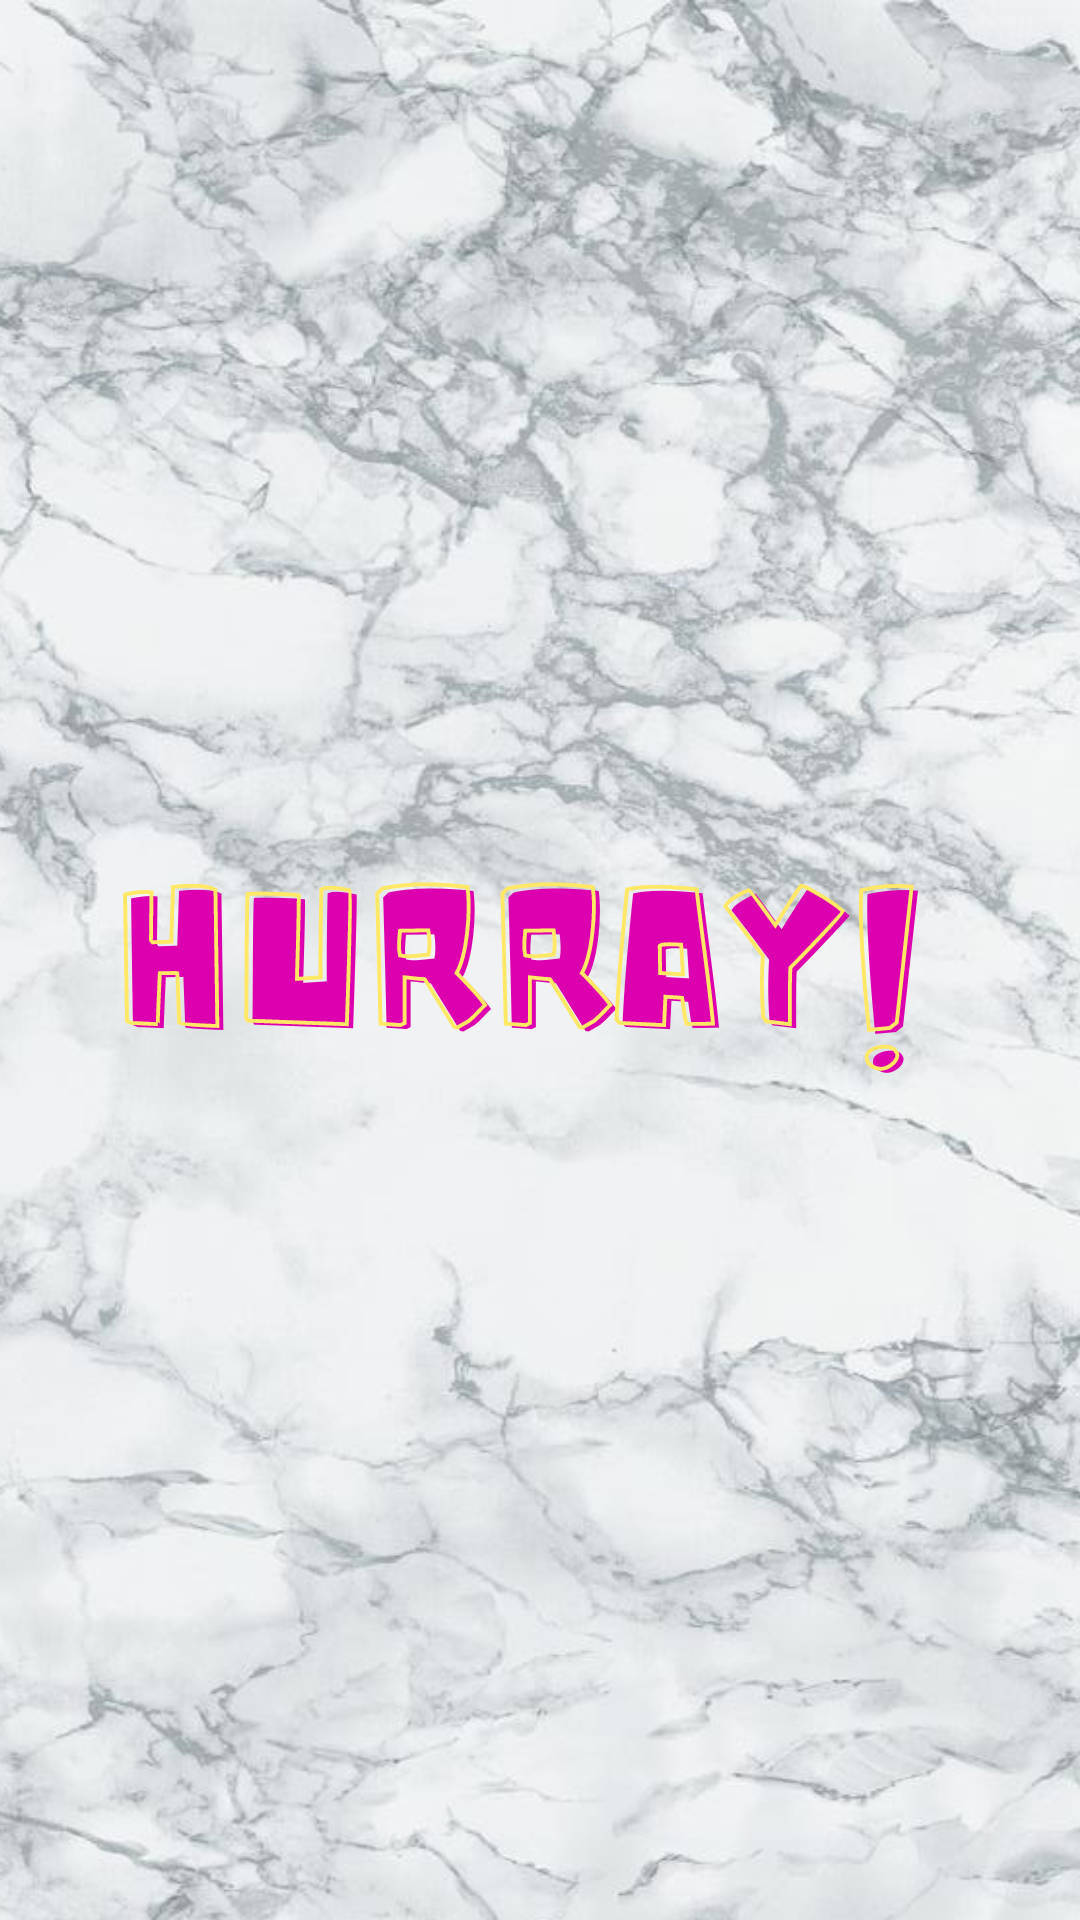 Hurray Black White Marble Iphone Wallpaper